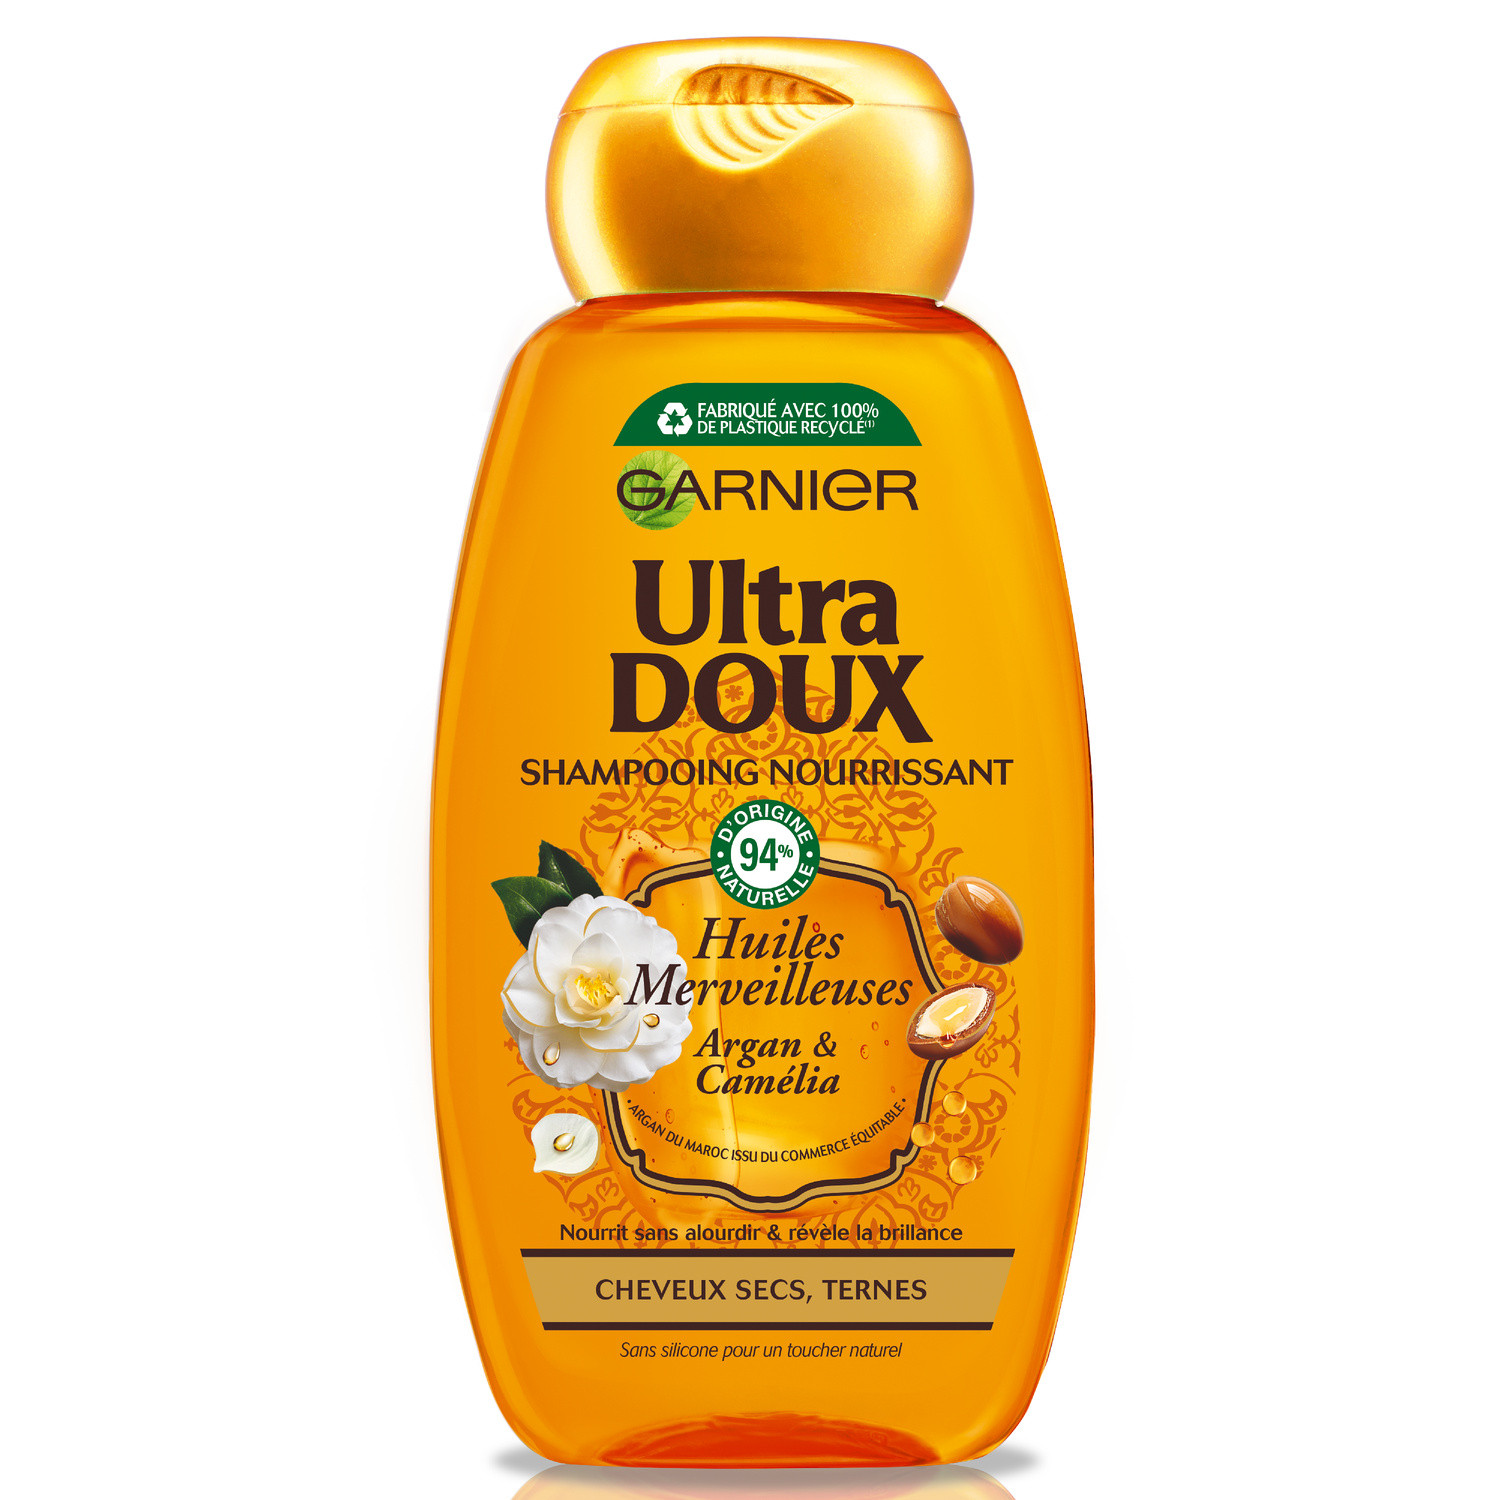 Argan And Camellia Oils Shampoo Ultra Doux | Online | My French Grocery